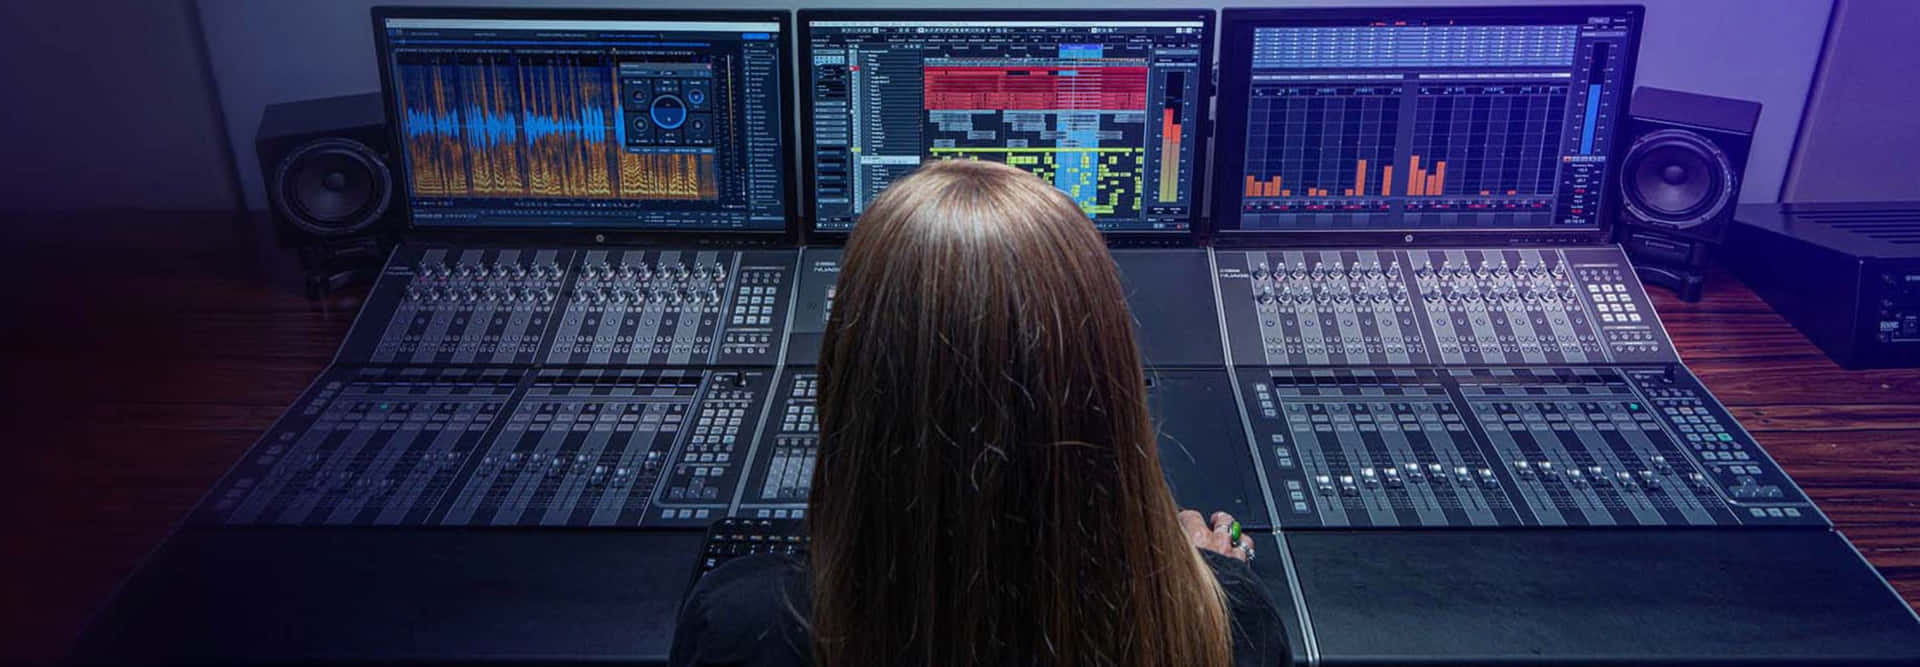 A Woman Is Sitting In Front Of Several Monitors In A Recording Studio